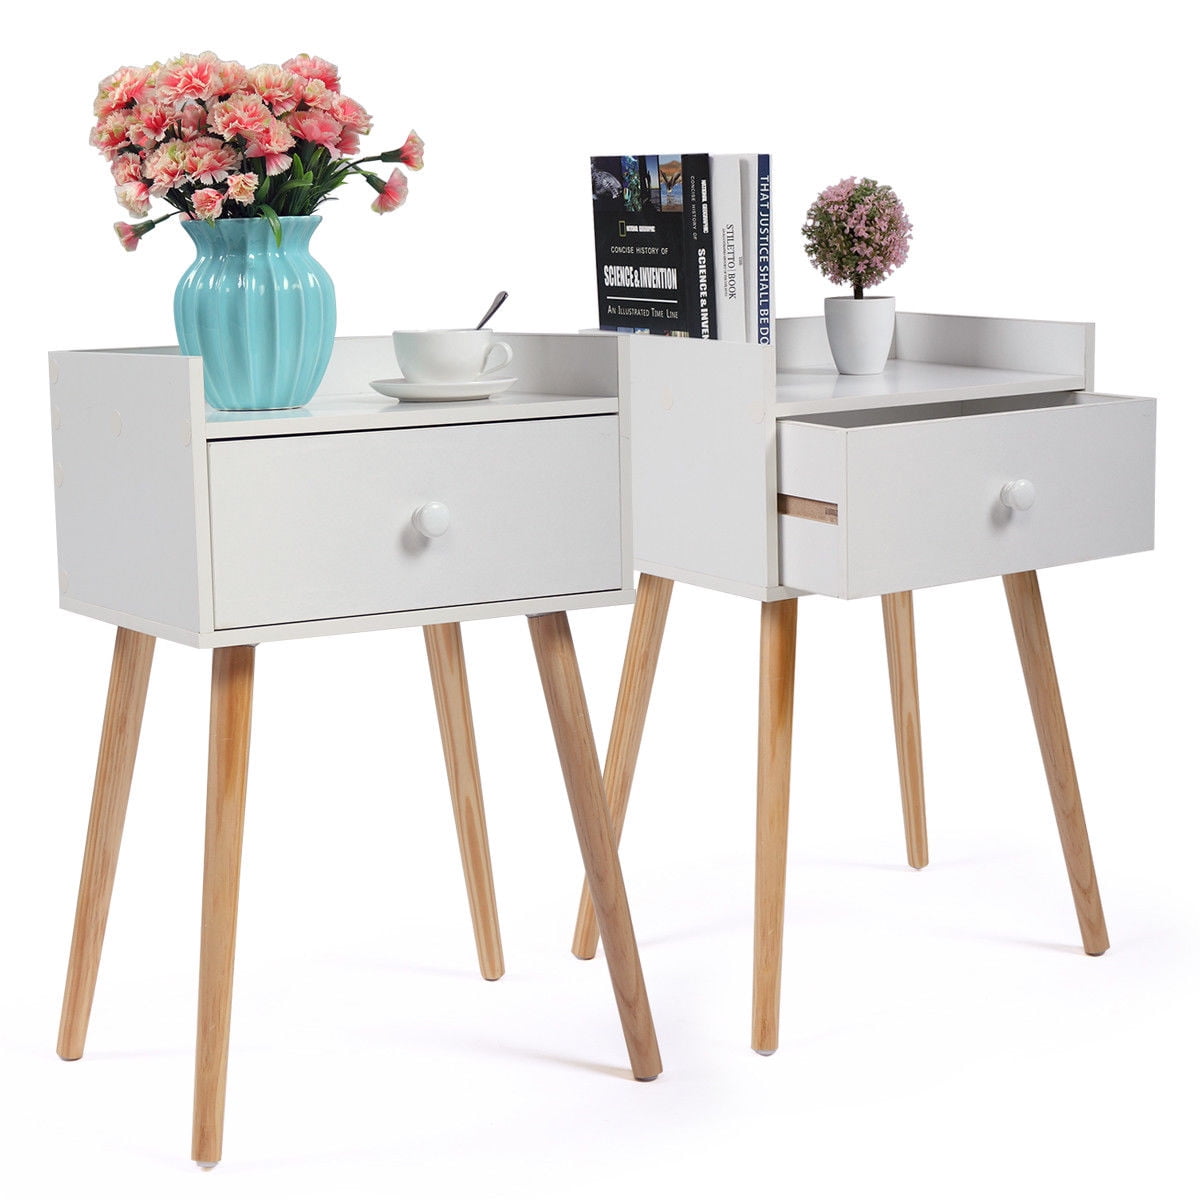 Set of 2 End Bedside Table Solid Wood Legs Nightstand with White Storage Drawer 